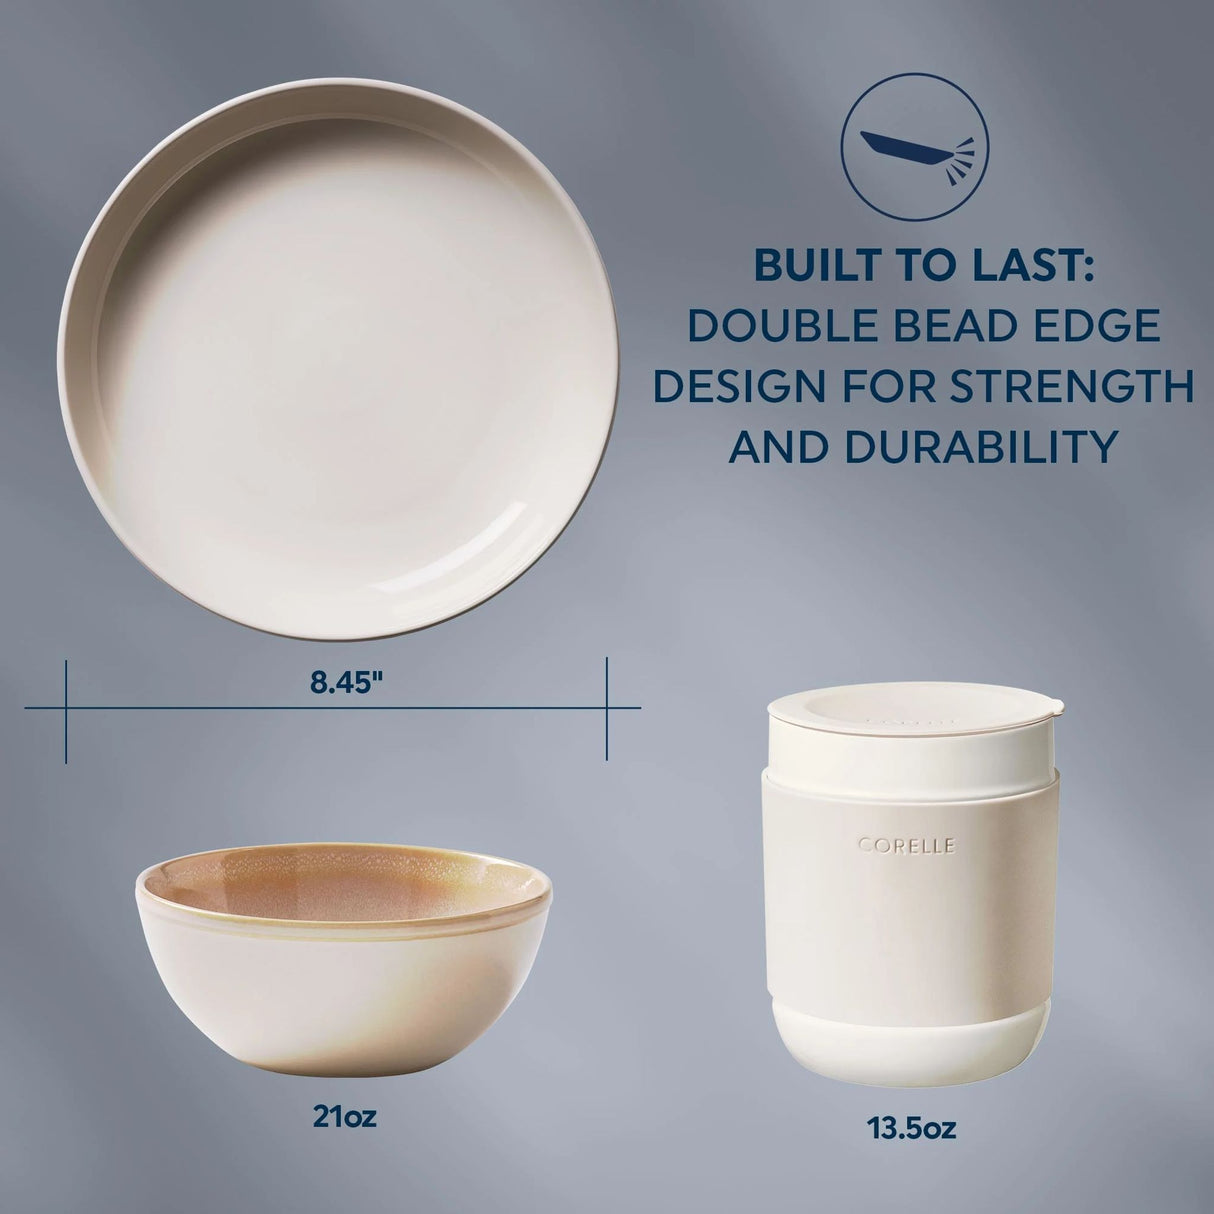  Text that says: Built to last: Double bead edge design fr stroength and durability